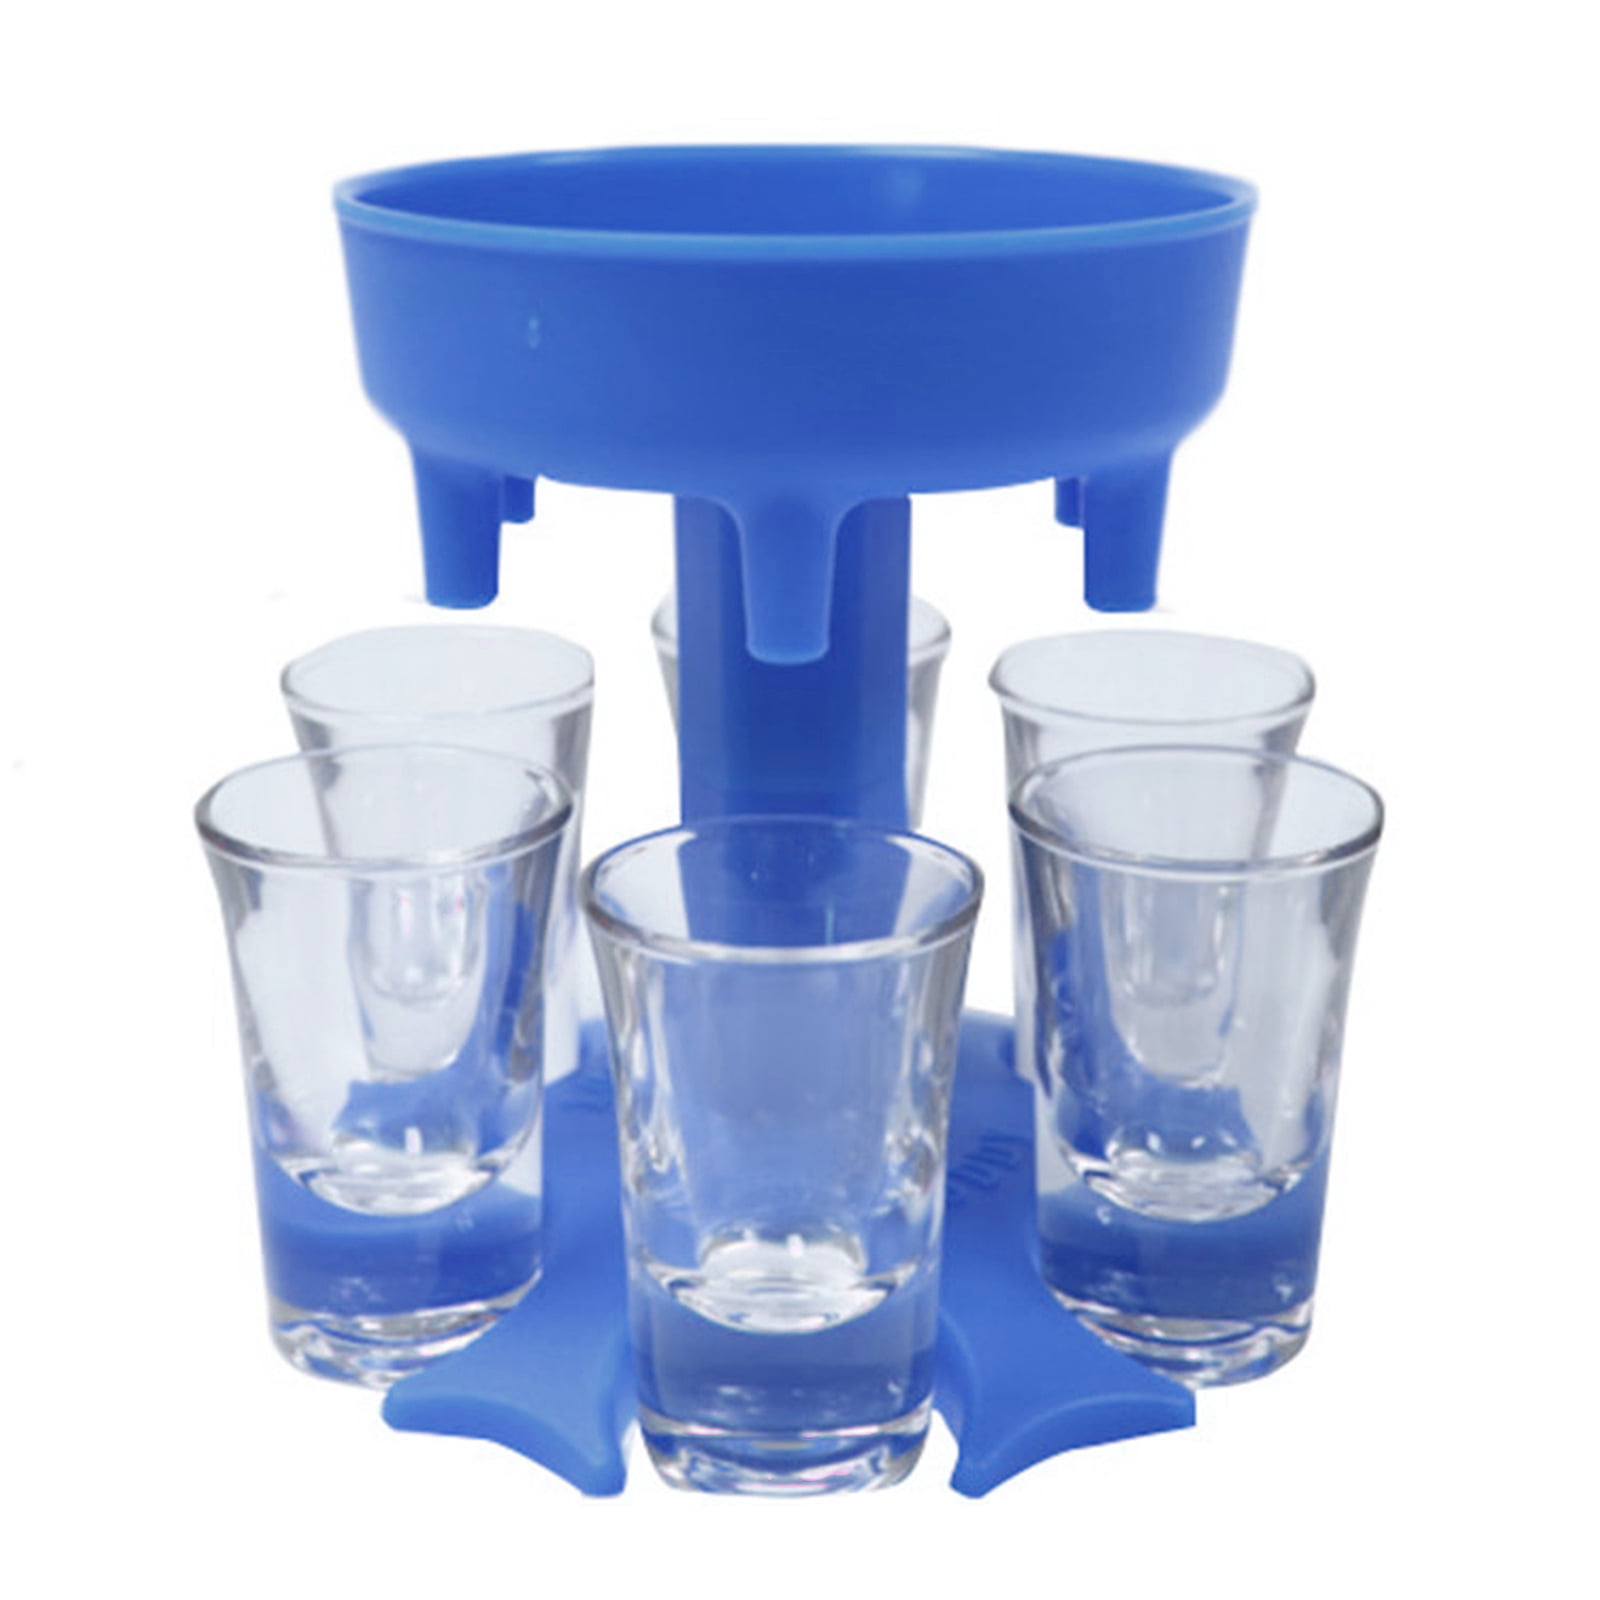 Christmas 6 Shot Glass Dispenser and Holder/Carrier Drinking Party Games Started